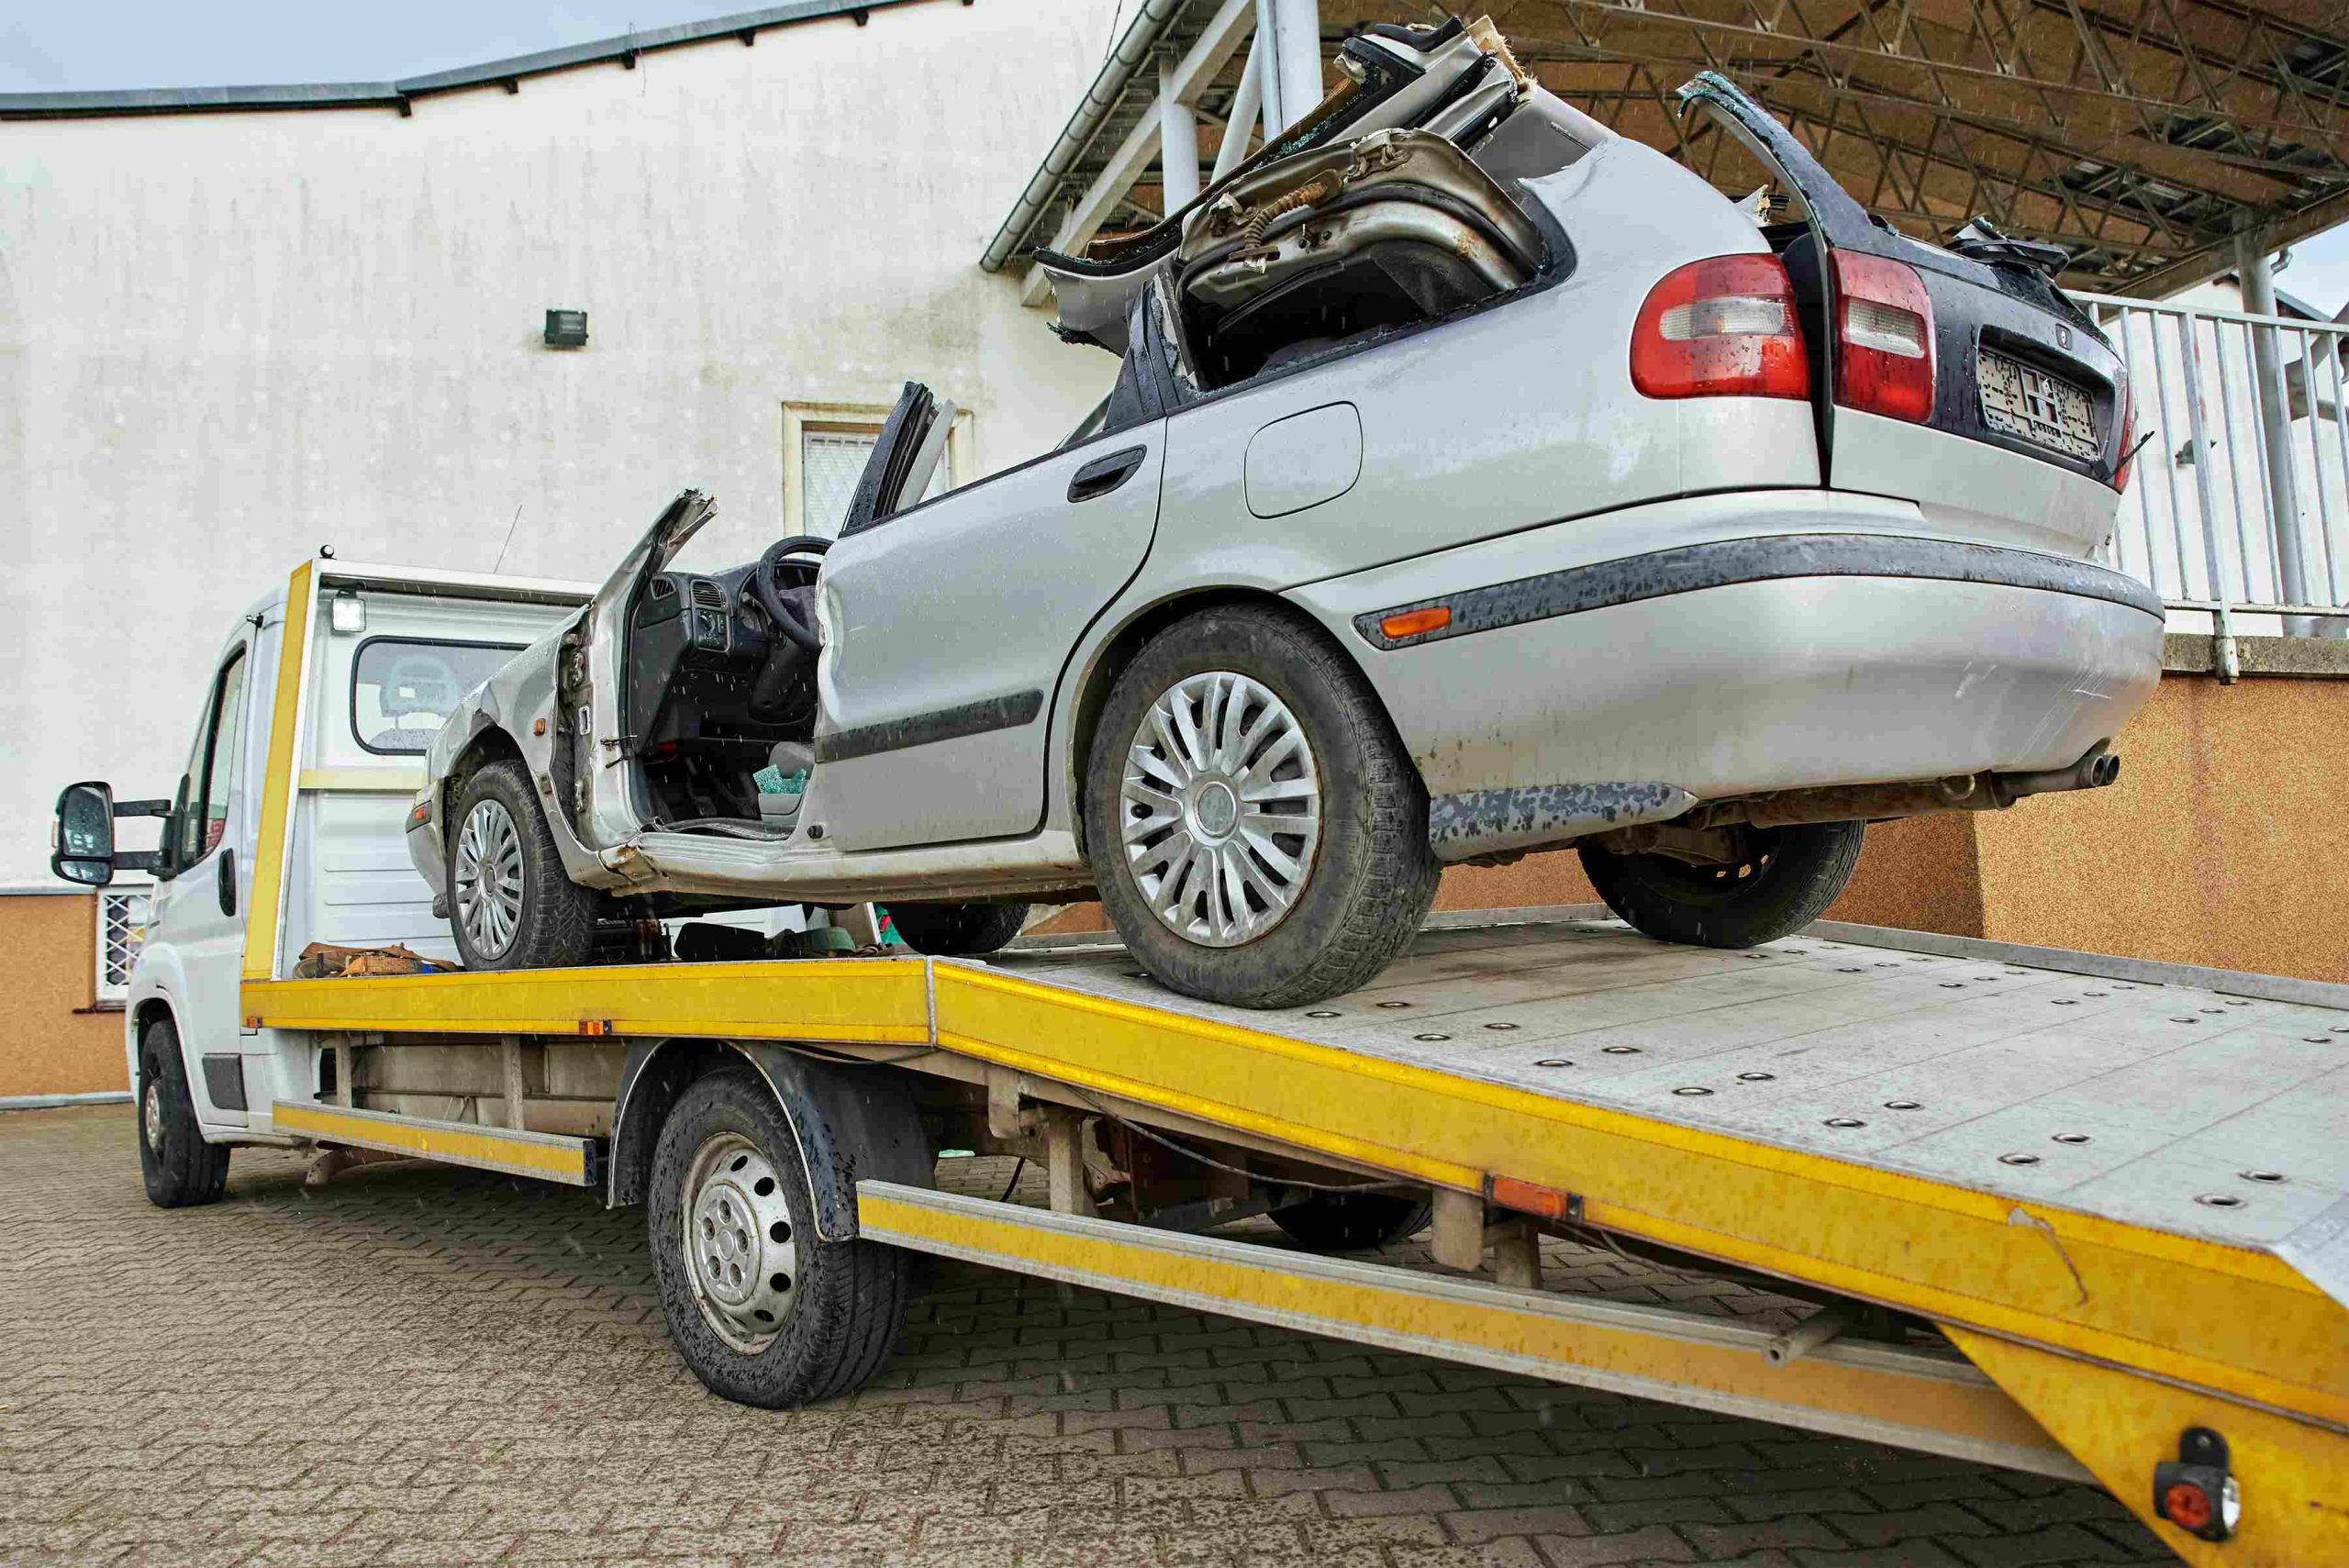 Vehicle Recovery Service In Swindon & Surrounding Areas, Reading, or nearby